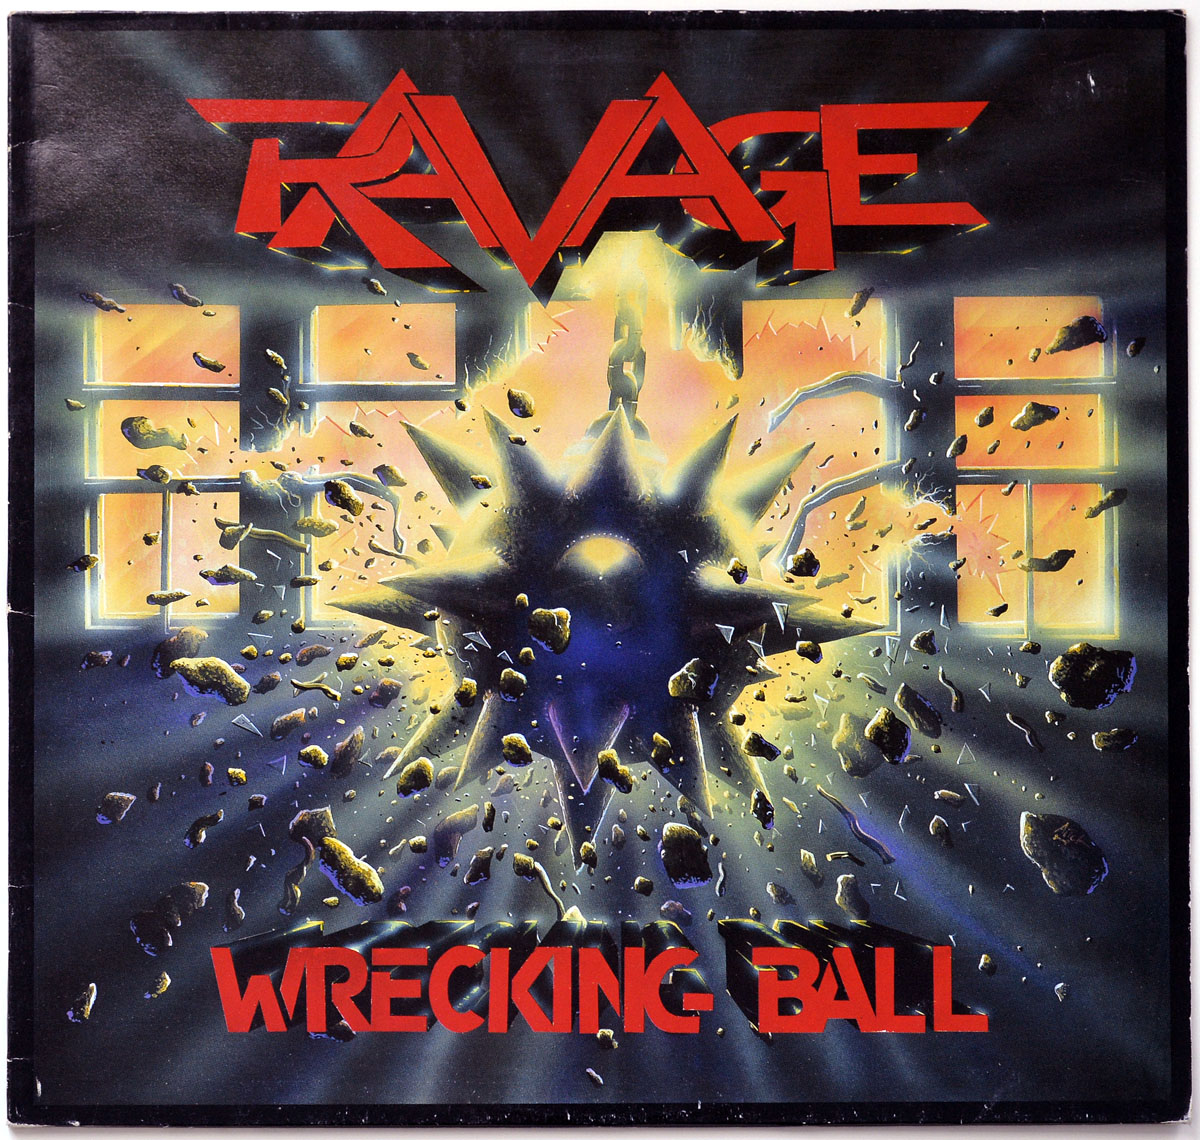 High Resolution Photo #10 Wrecking Ball by Ravage https://vinyl-records.nl 